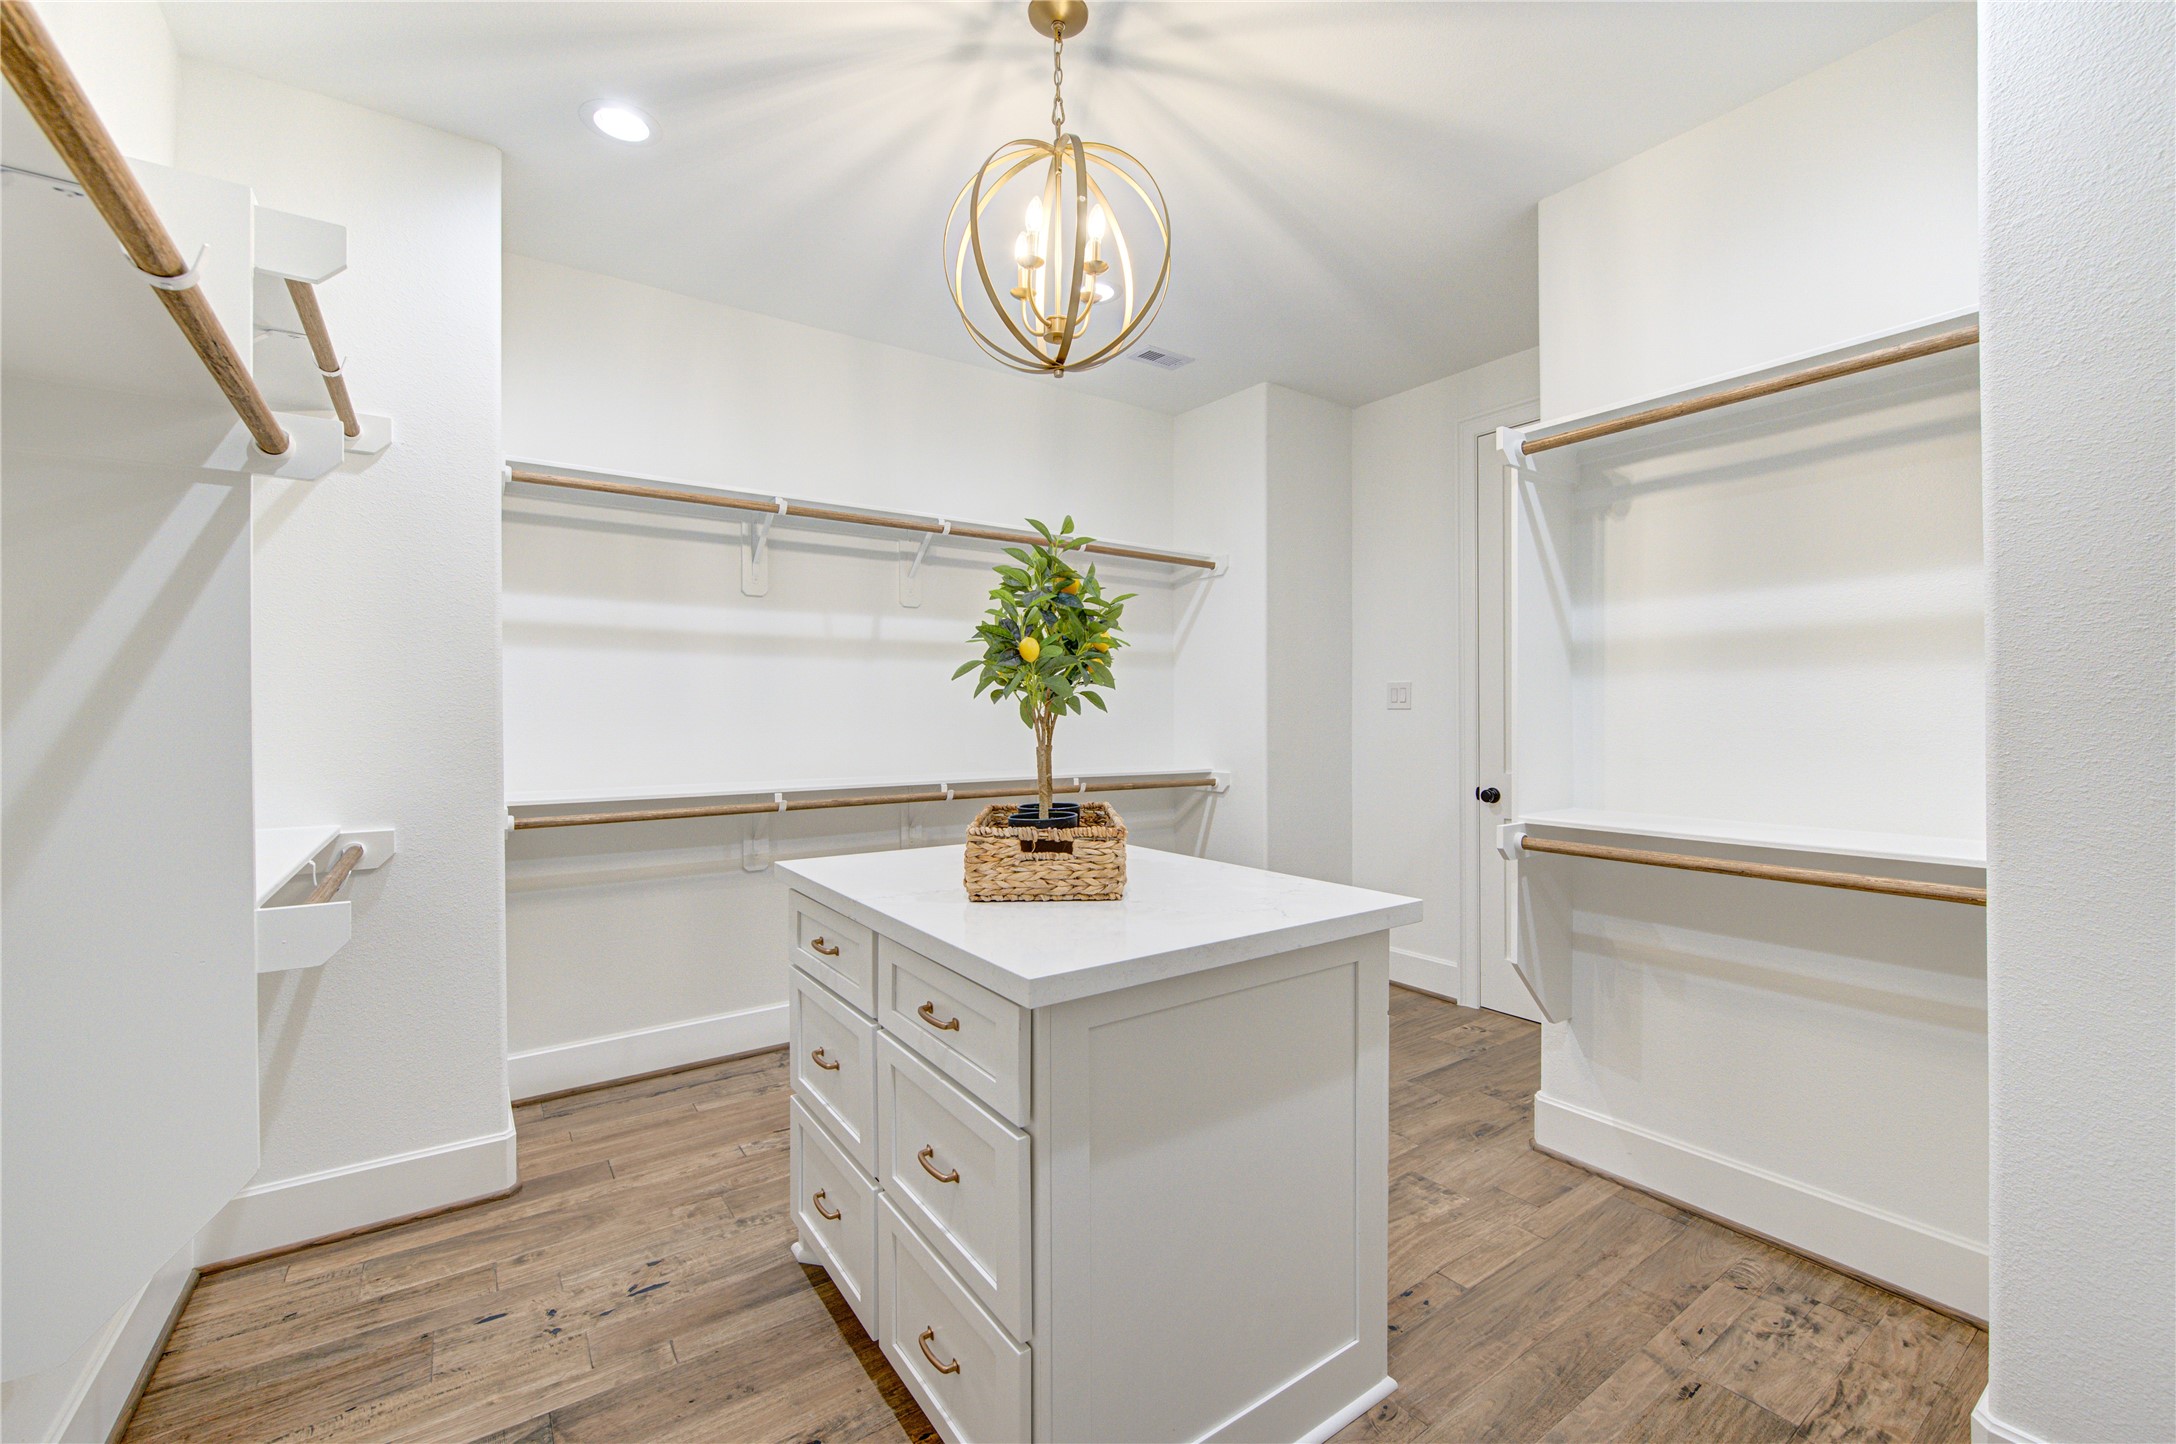 The walk-in wardrobe for the primary bedroom is designed with organization and space for your most discerning buyer.